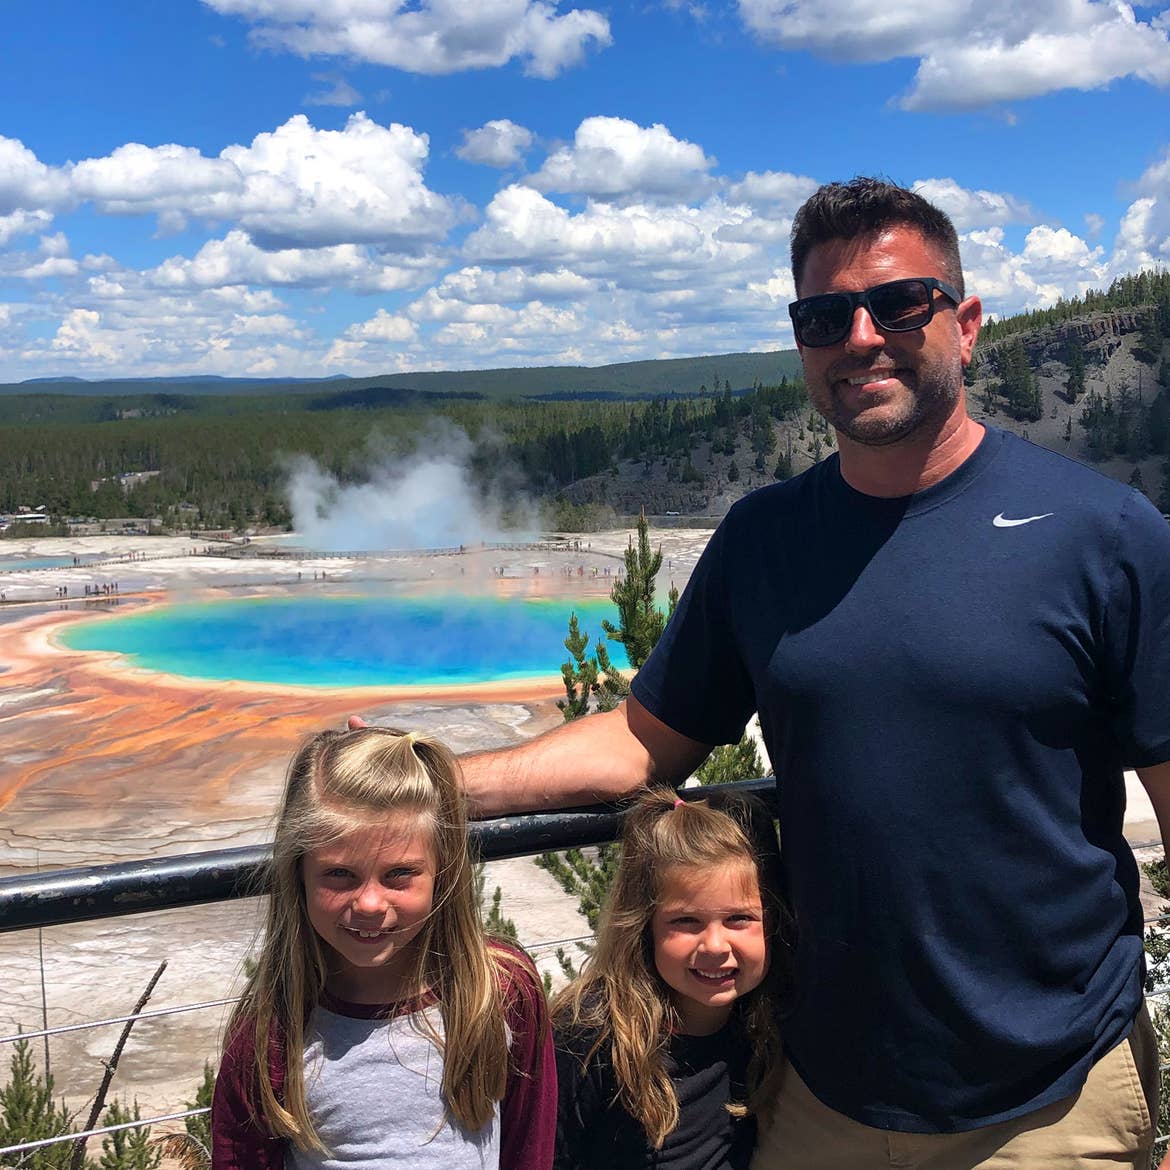 Author, Chris Johnstons' husband, Josh (far-left), stands in front of the Grand Prismatic Springs Springs at Yellowstone National Park with their daughters, Kyndall (front-left), and Kyler (front-right).